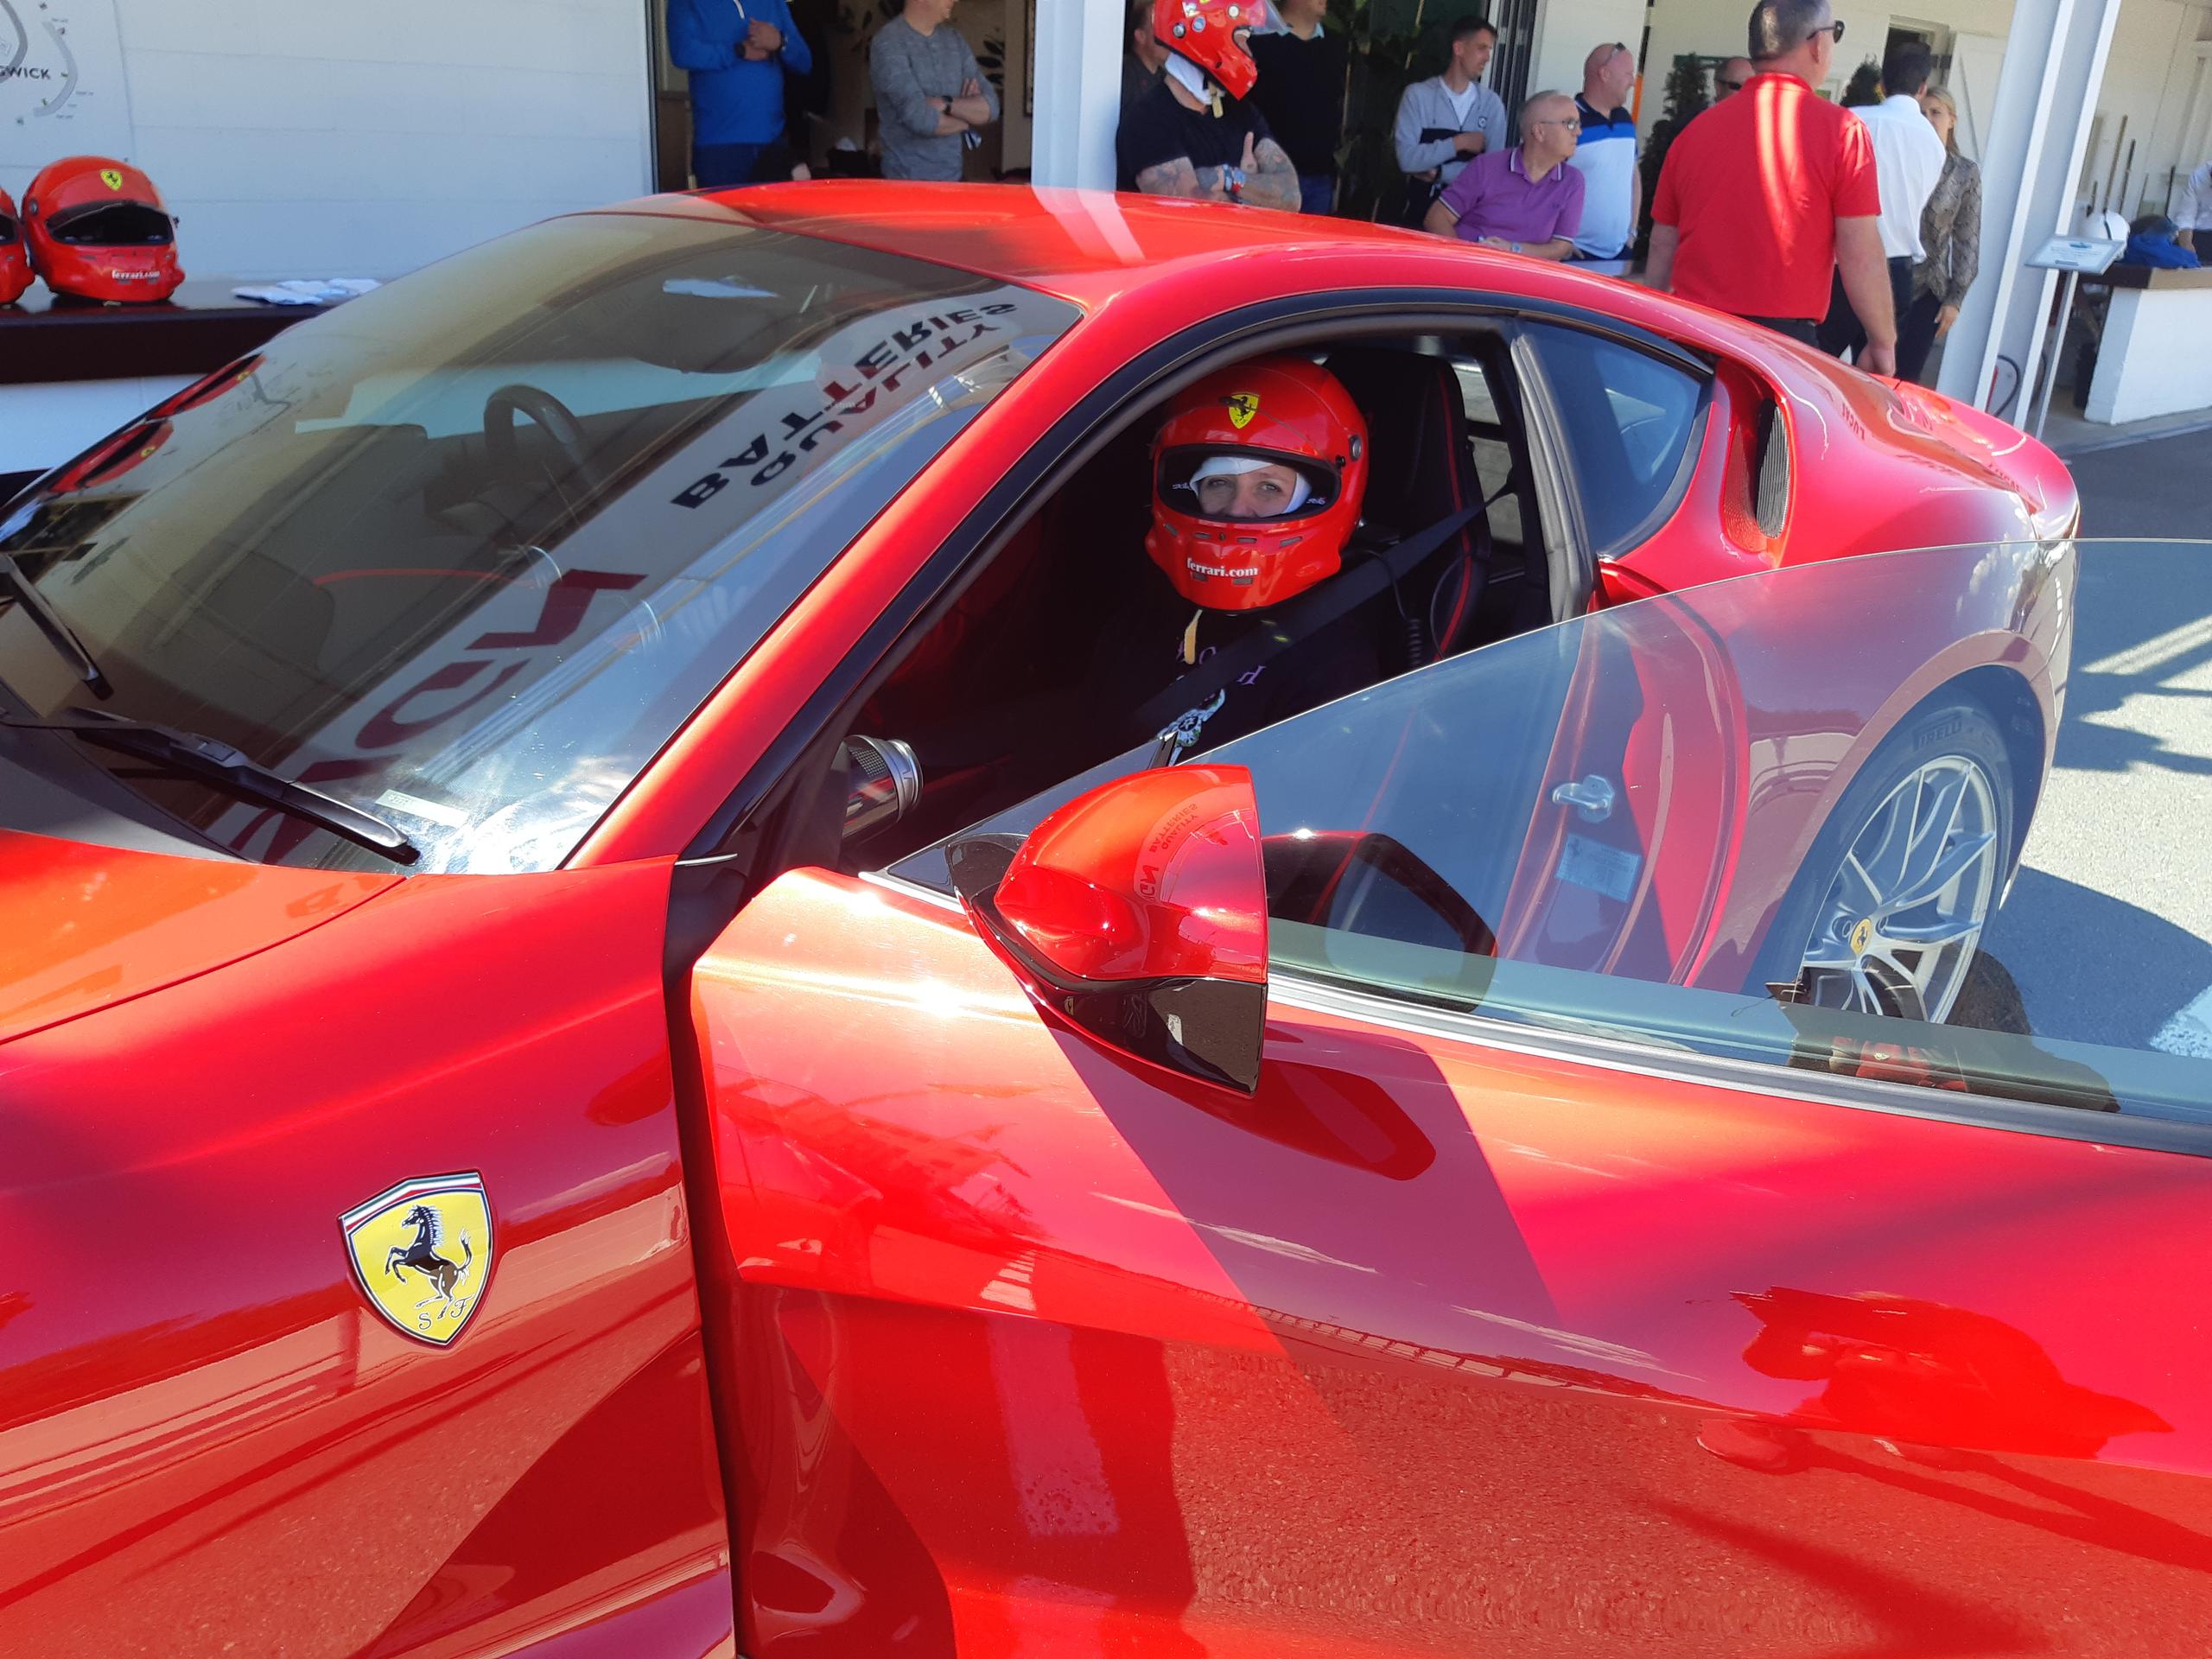 Exceptional customer service leads to a supercar track day